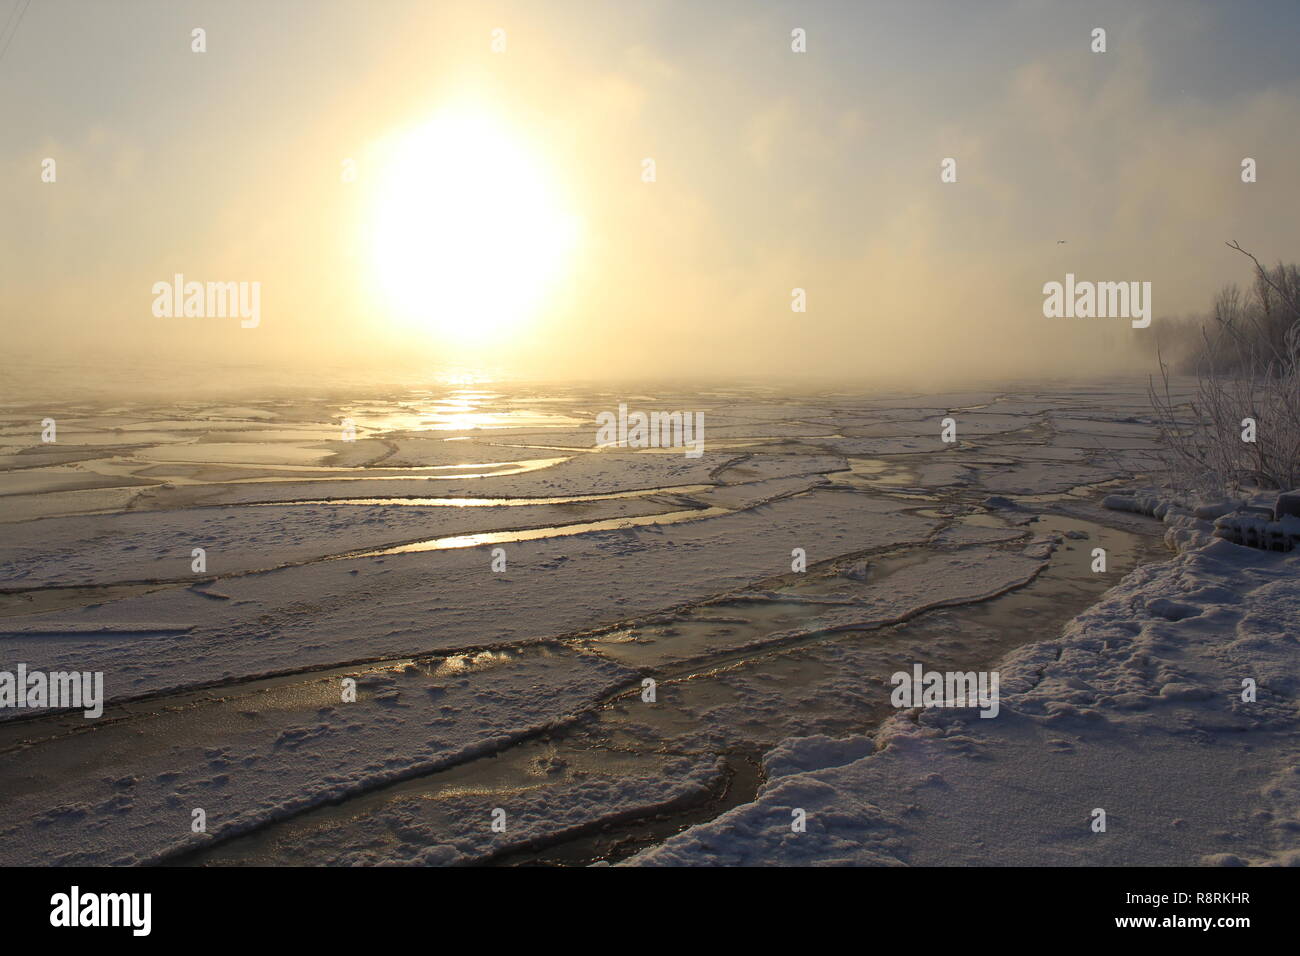 Sunrise in winter at minus 15 degrees below zero on the banks of the Saint-Laurent river in Montréal, Canada. Stock Photo